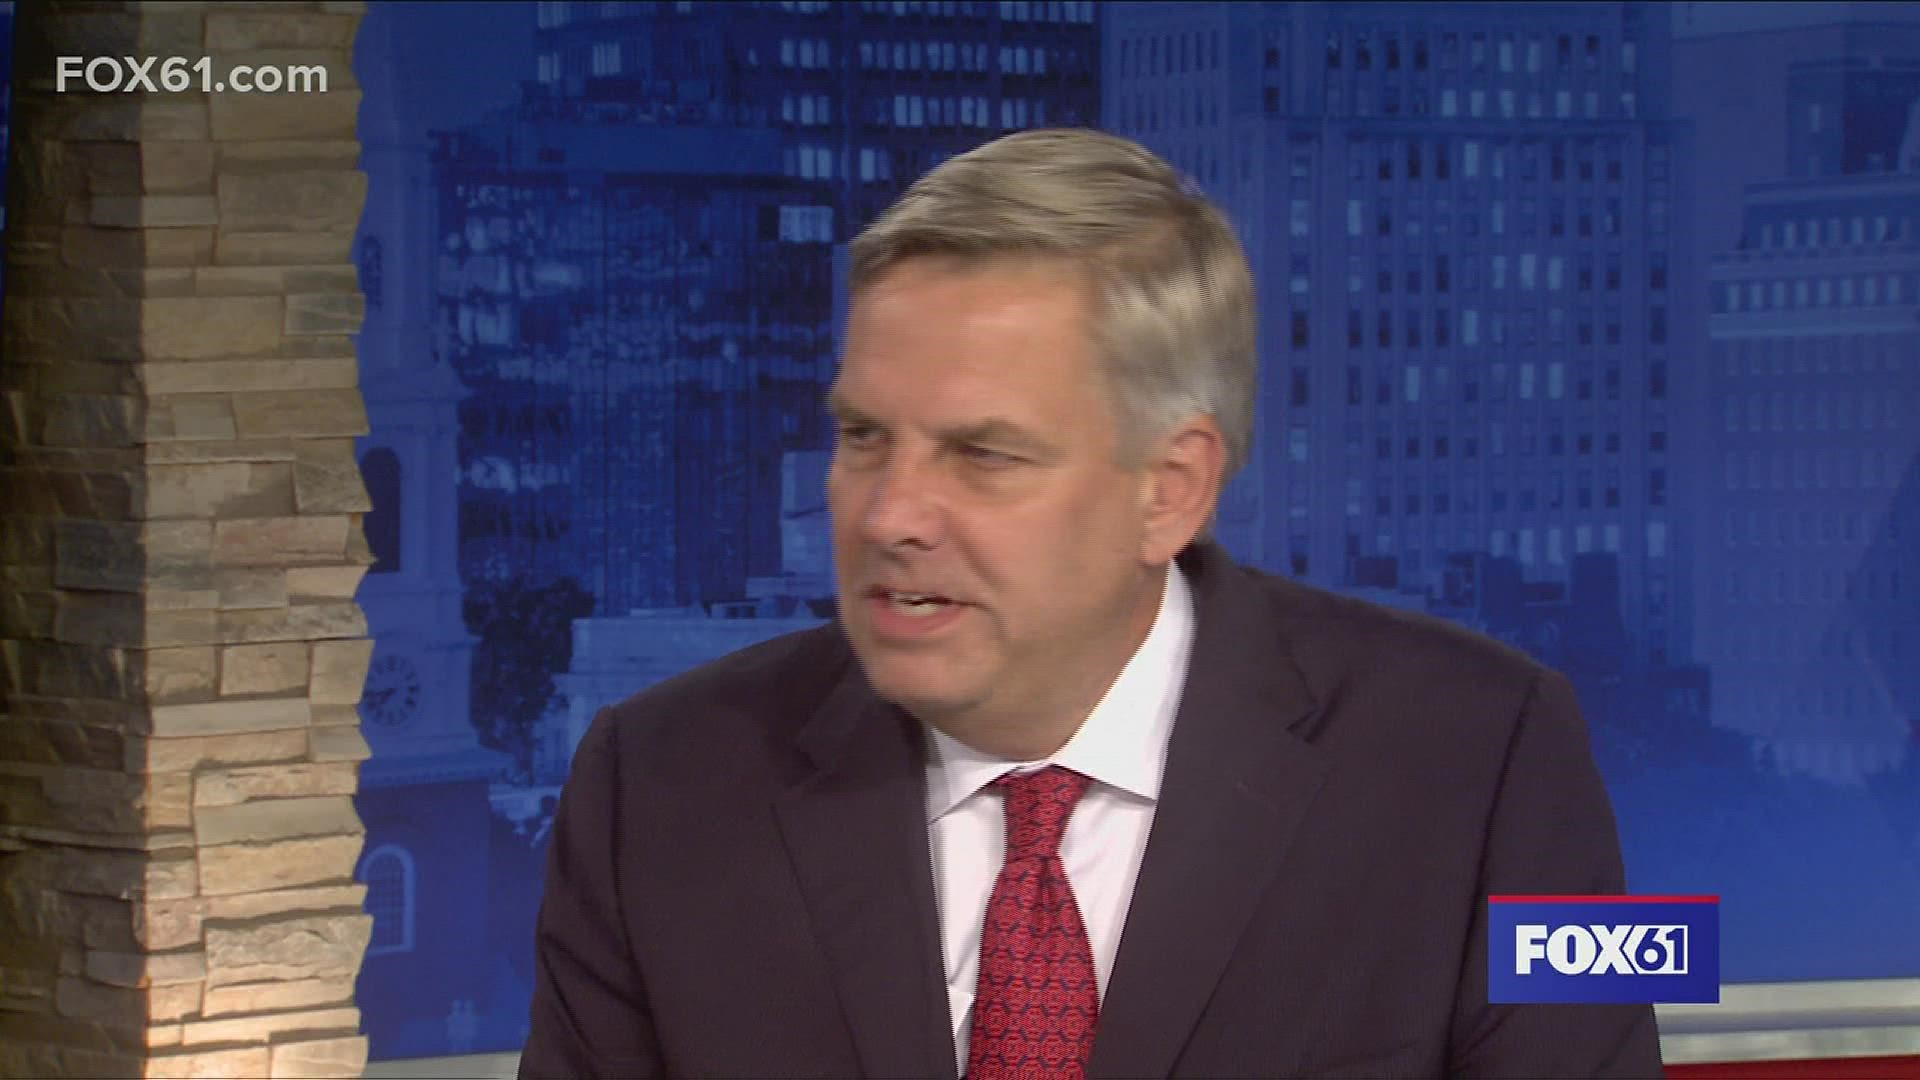 We talk with the GOP candidate for governor